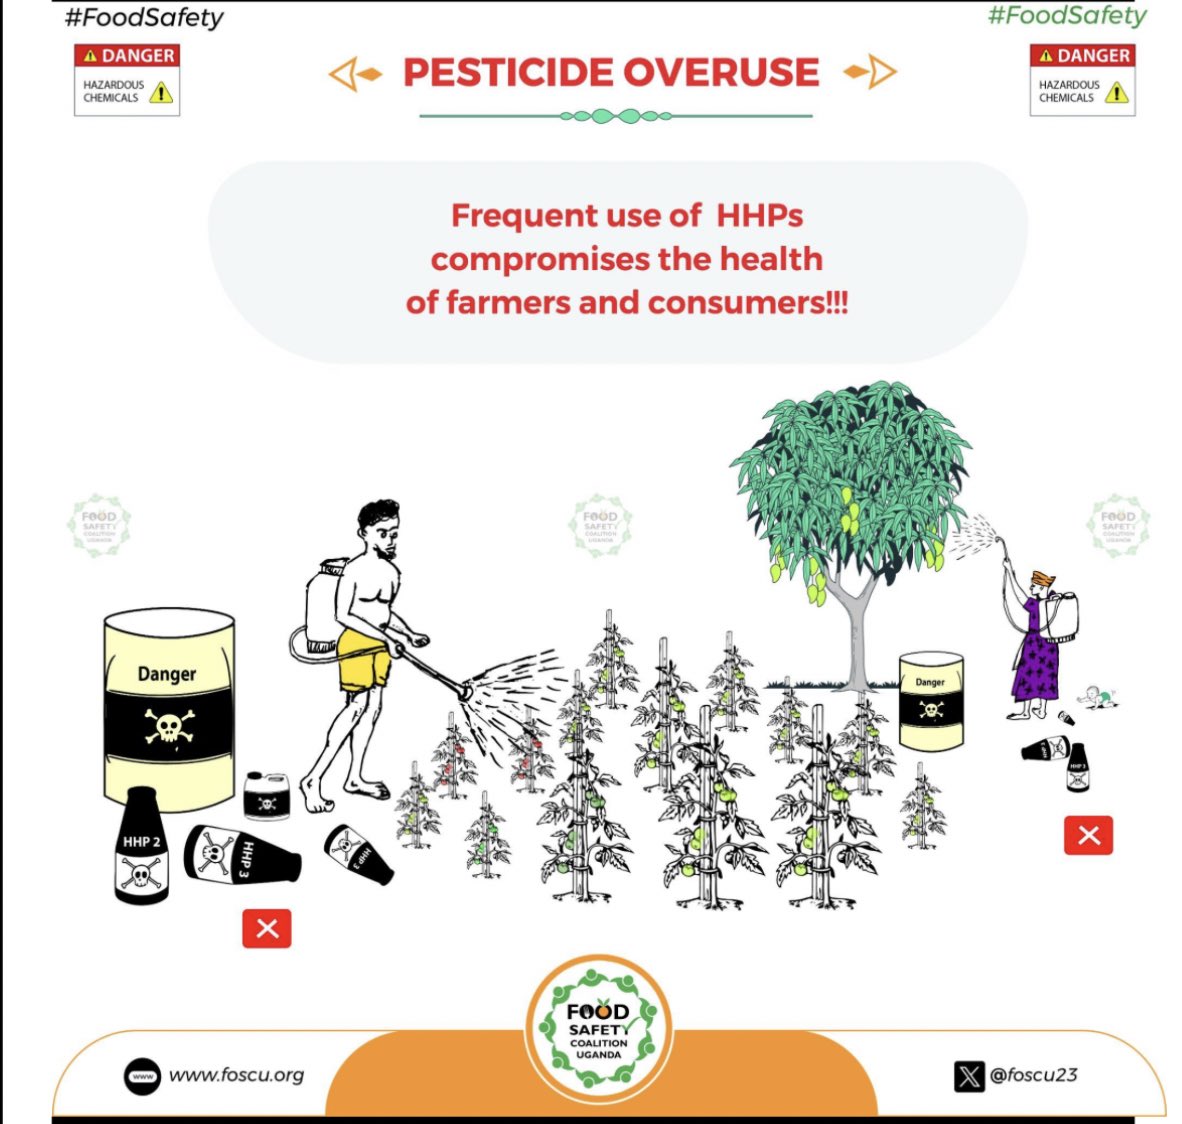 FOOD SAFETY ALERT!! Over-reliance on CHEMICAL PESTICIDES increases the chances of exposure and associated negative effects for human health, biodiversity, and the environment. #FoodSafey | @foscu23 | foscu.org